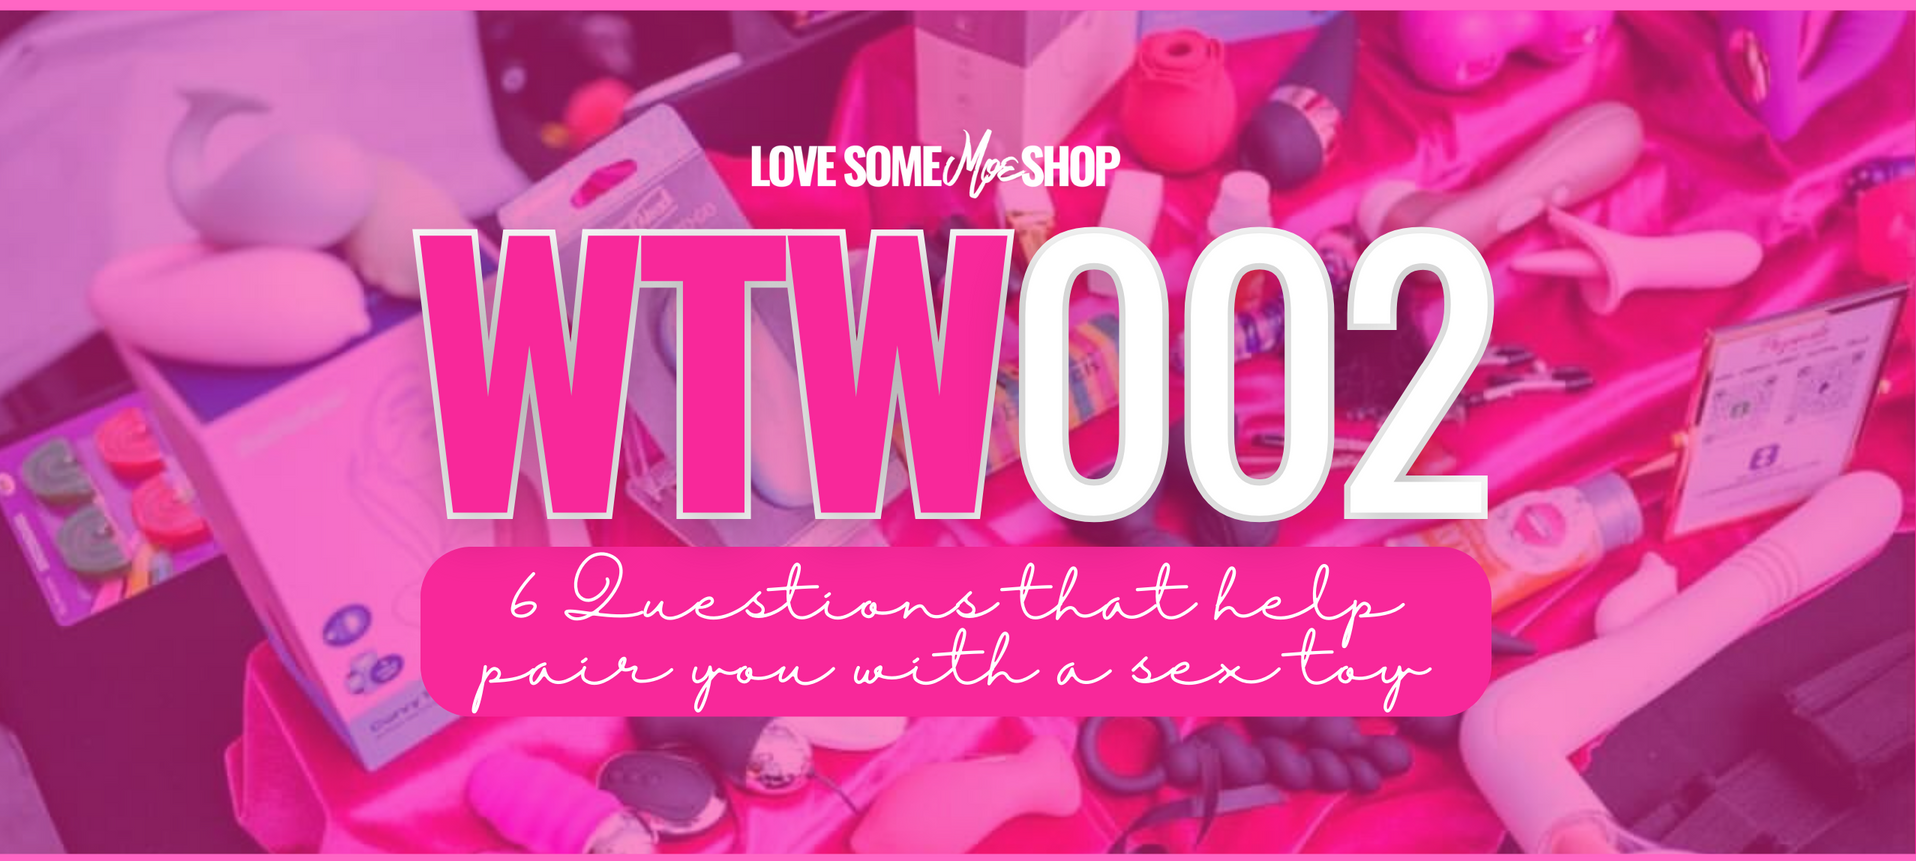 WTW002:  6 Questions to Help Pair You With a Sex Toy